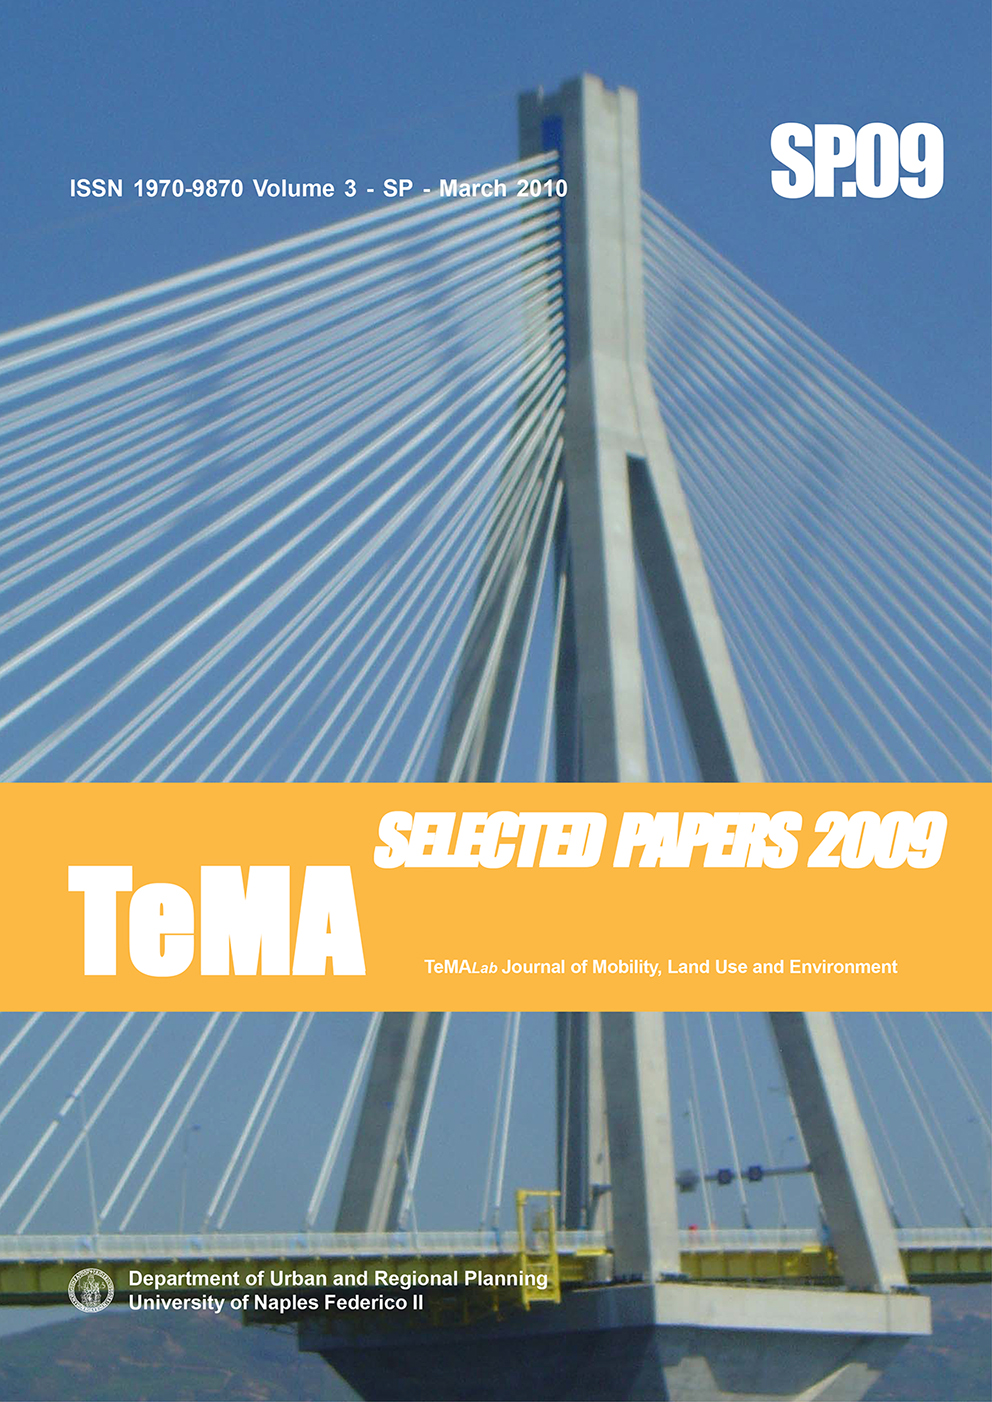 09_Vol 2 (2009): Selected Papers 2009